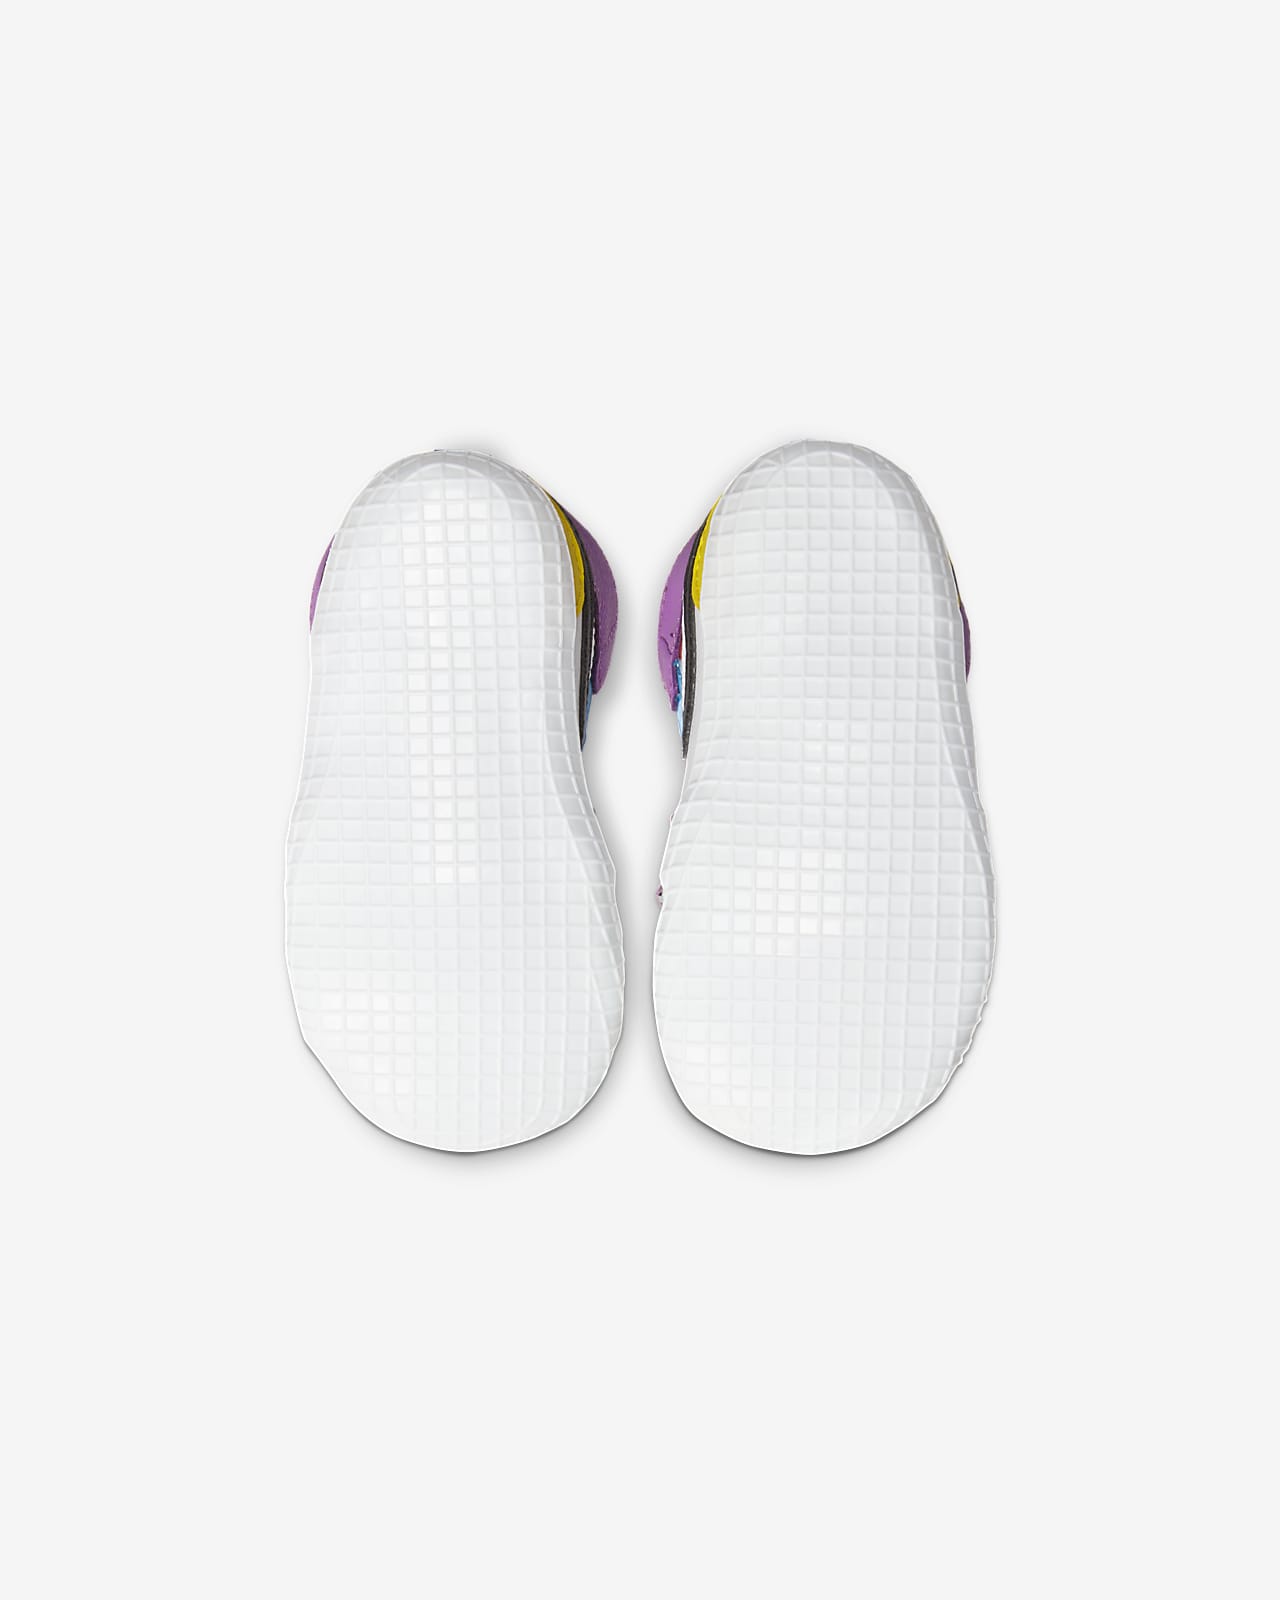 nike crib shoes size guide